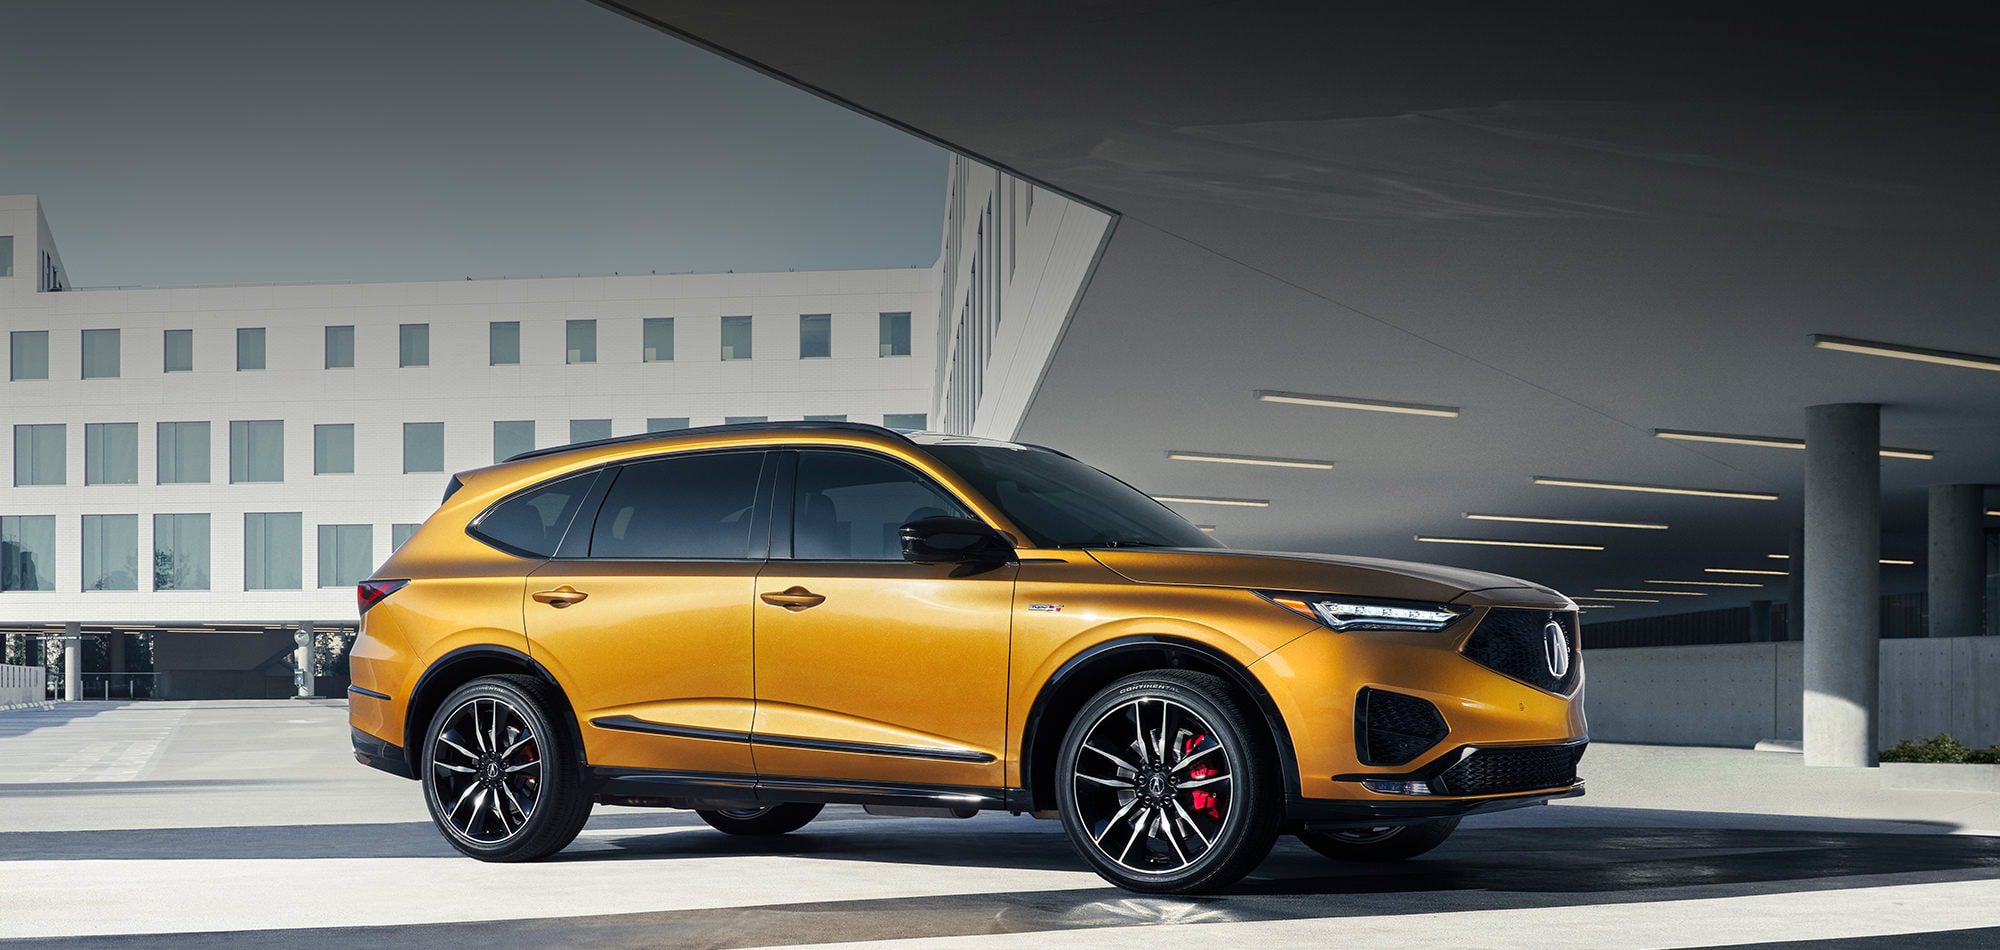 MDX Type S future vehicle XL - Acura On a Hot Streak With Type-S Lineup